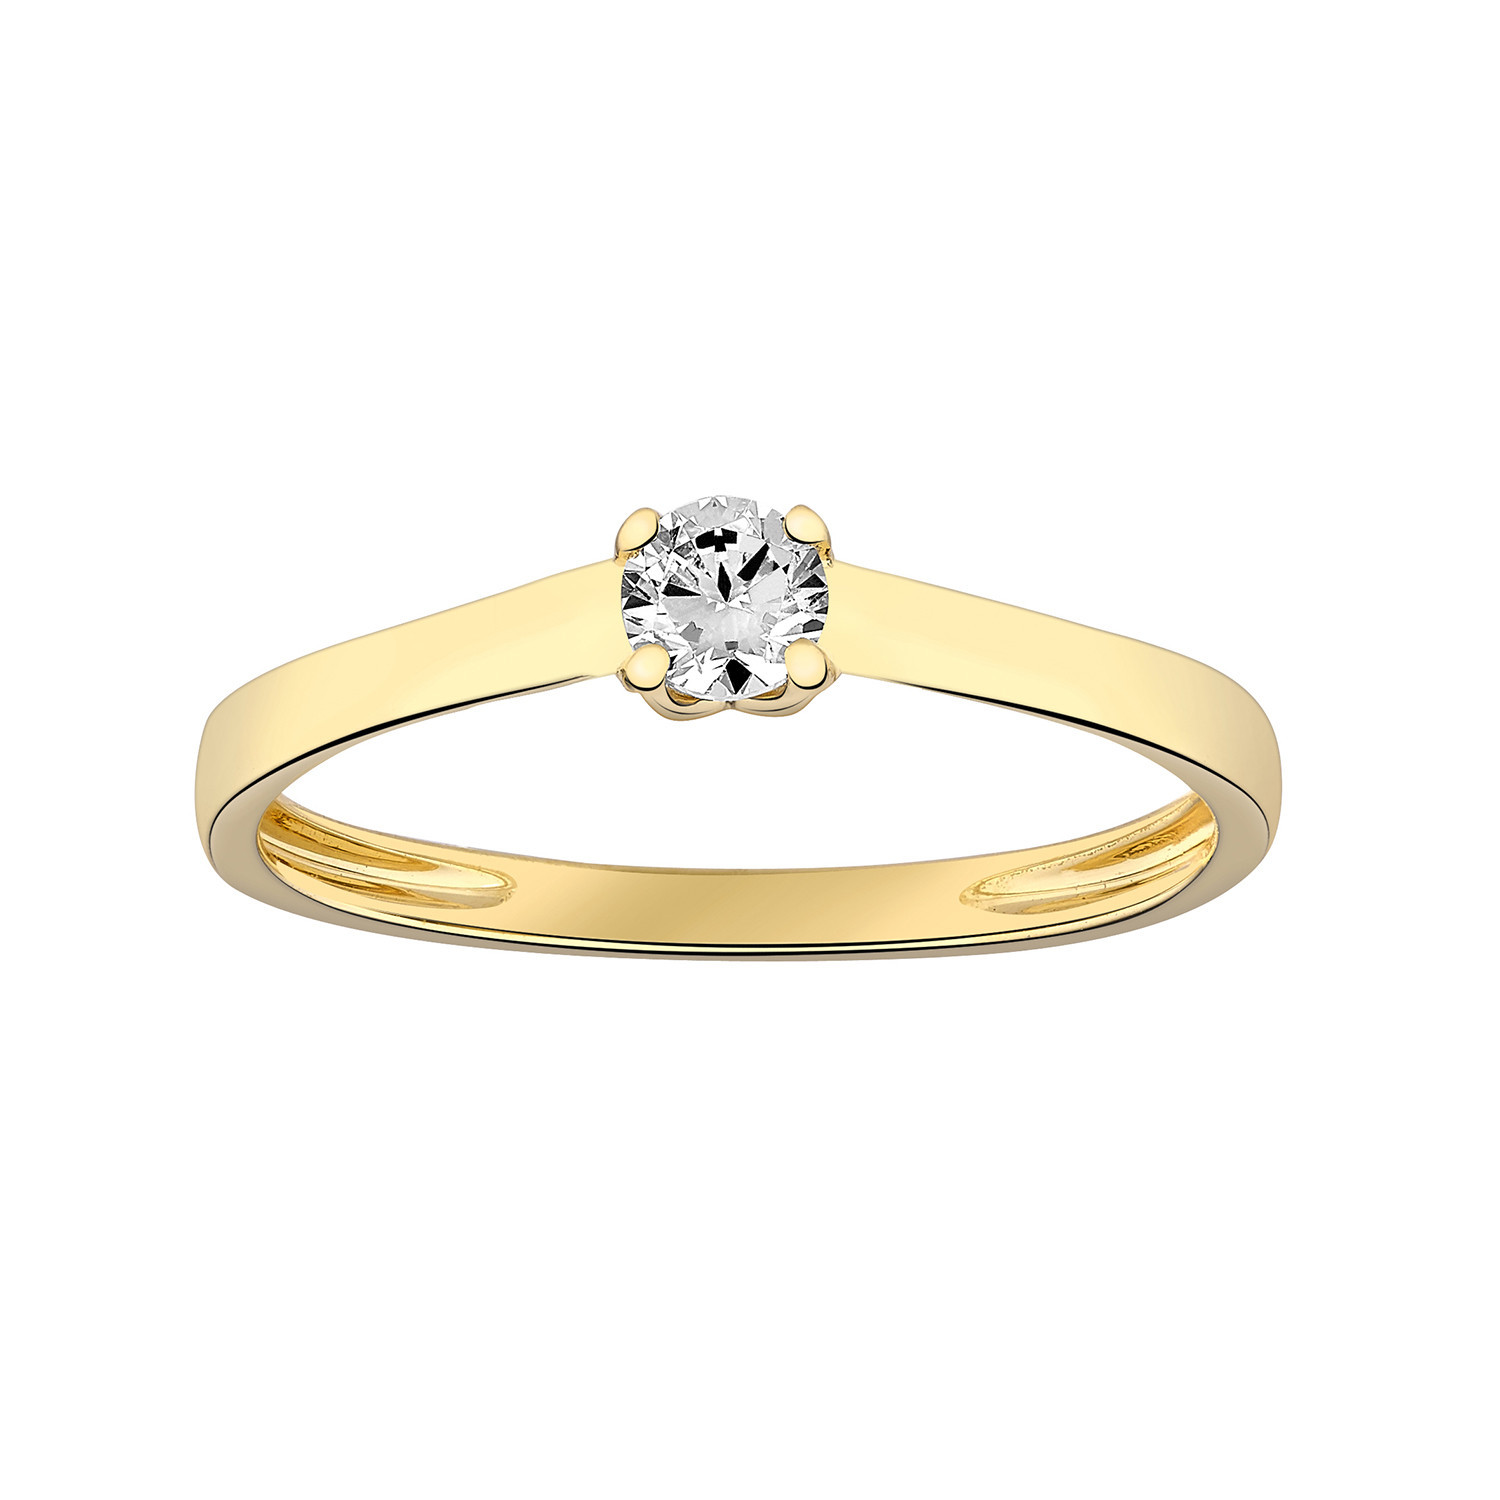 Solitaire Brillaxis diamant 4 griffes or 18 carats
0.30 ct